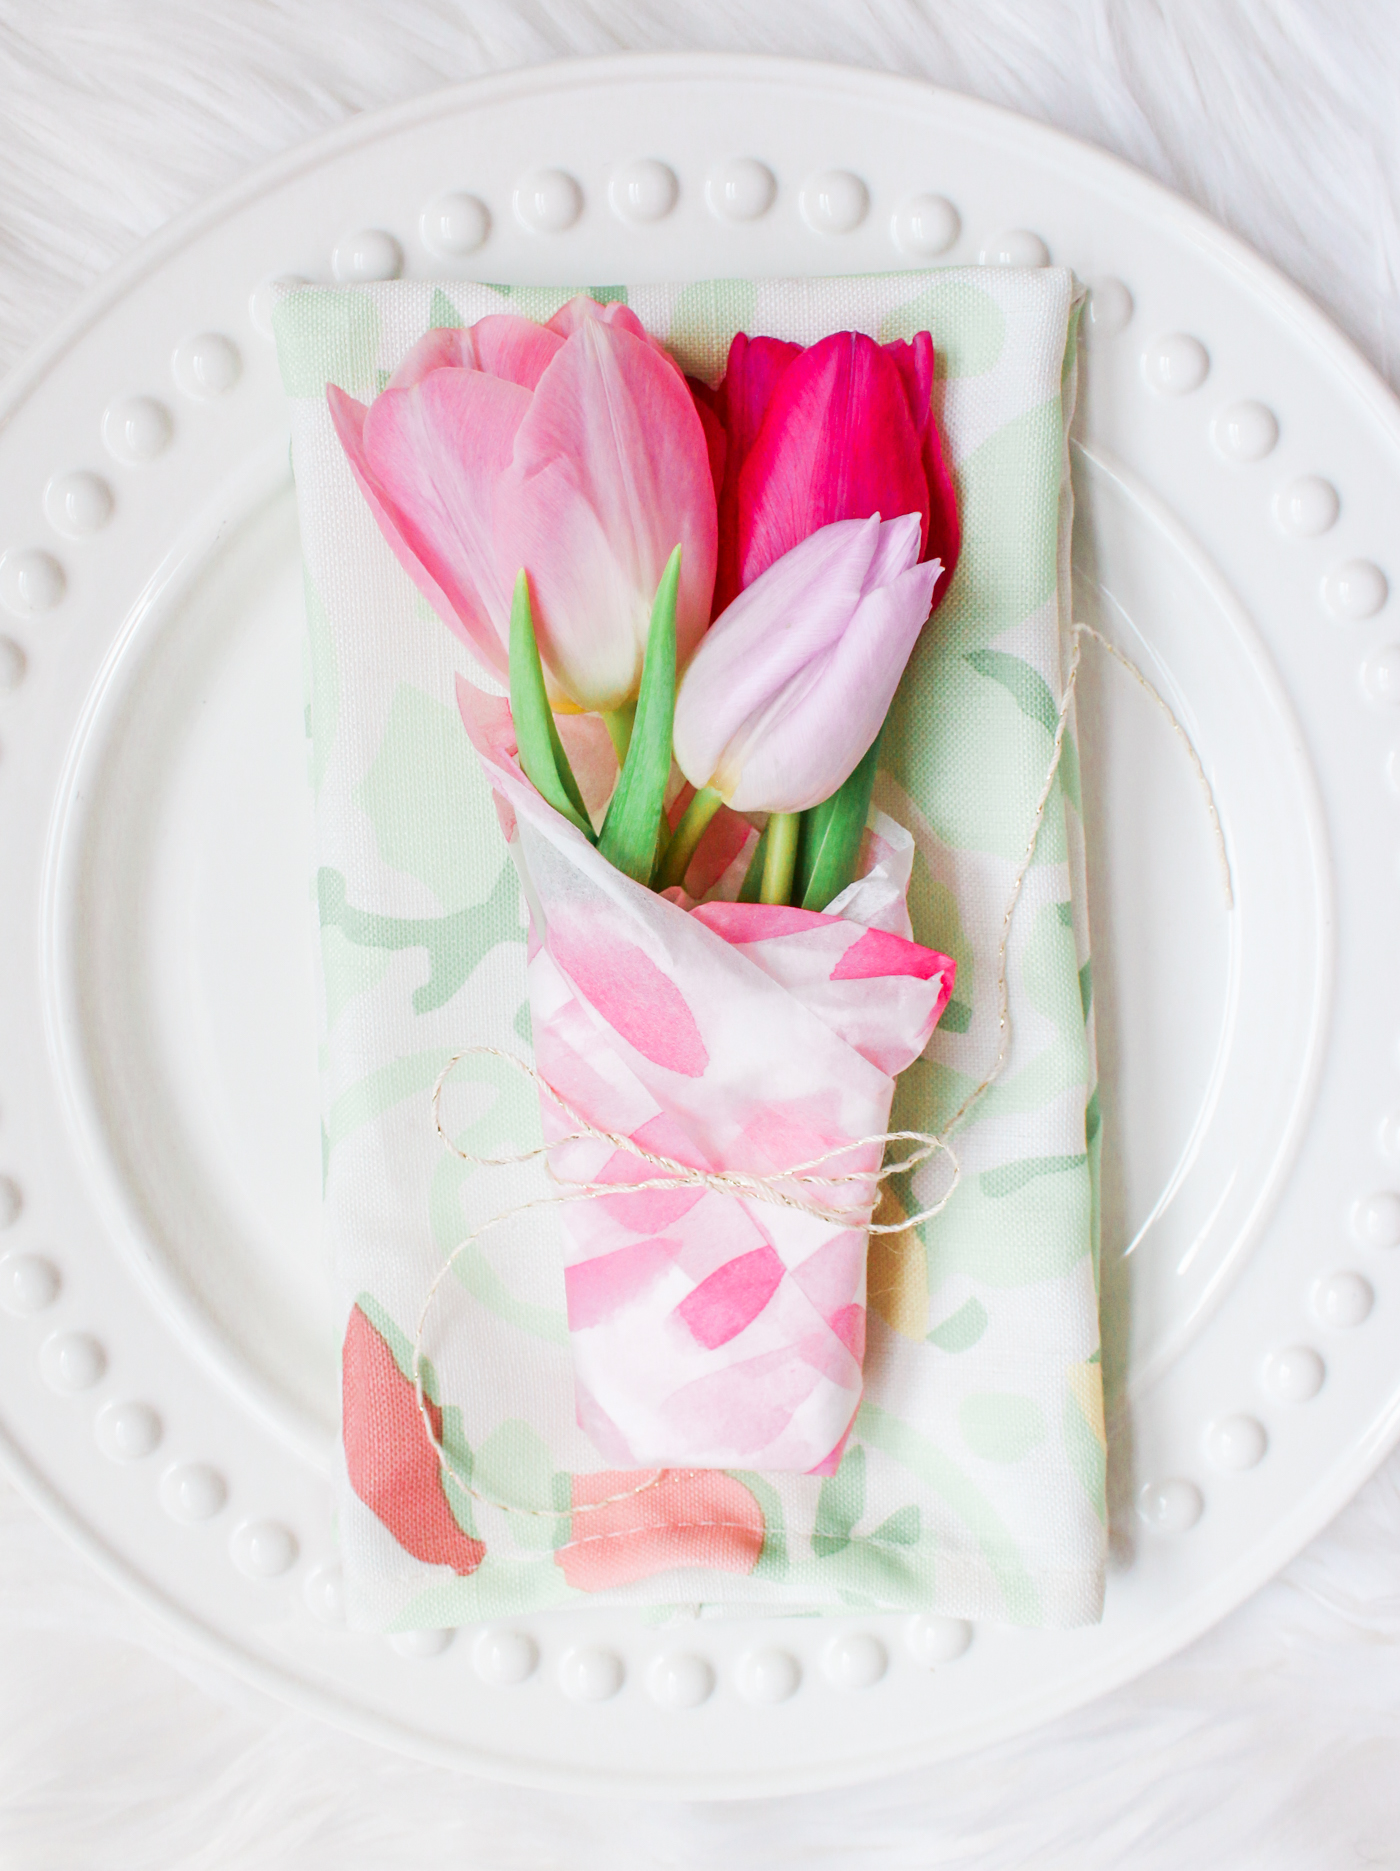 Country Spring Decor: DIY Mini Spring Tulip Bouquets by southern lifestyle blogger Stephanie Ziajka from Diary of a Debutante, spring tulip bouquet, Easter tulip bouquet, Easter place setting